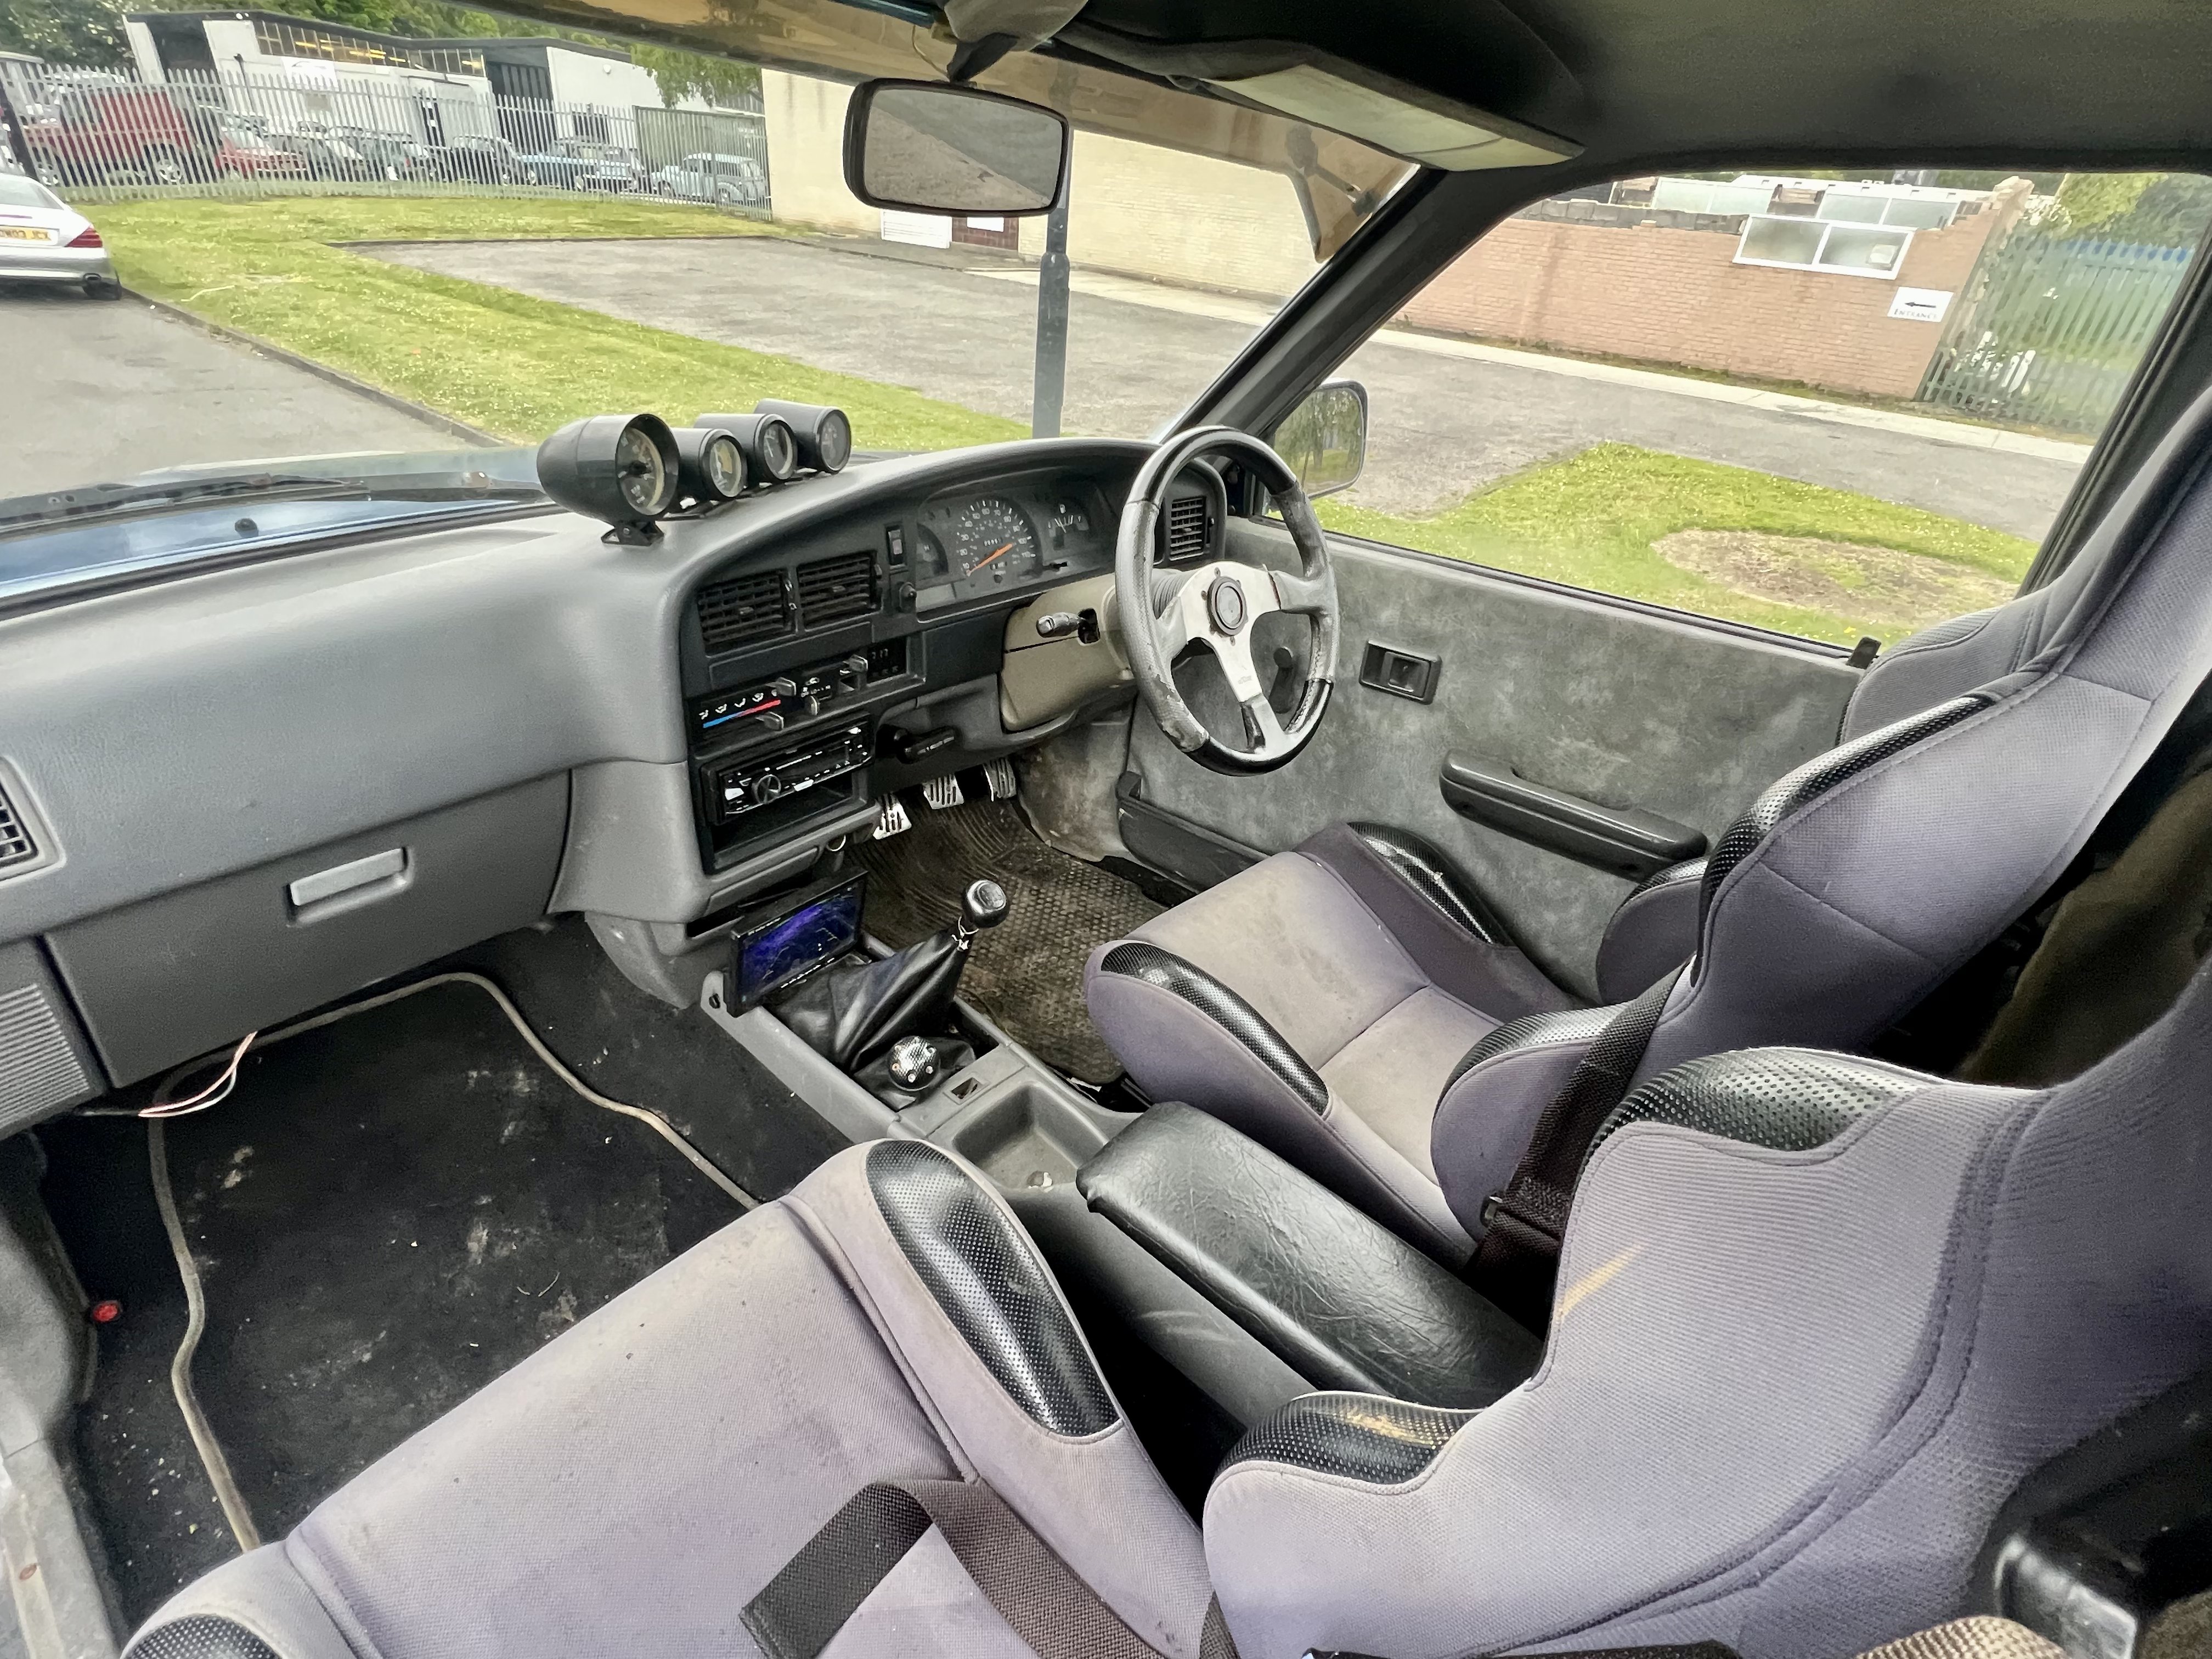 Toyota Hilux - Image 17 of 21